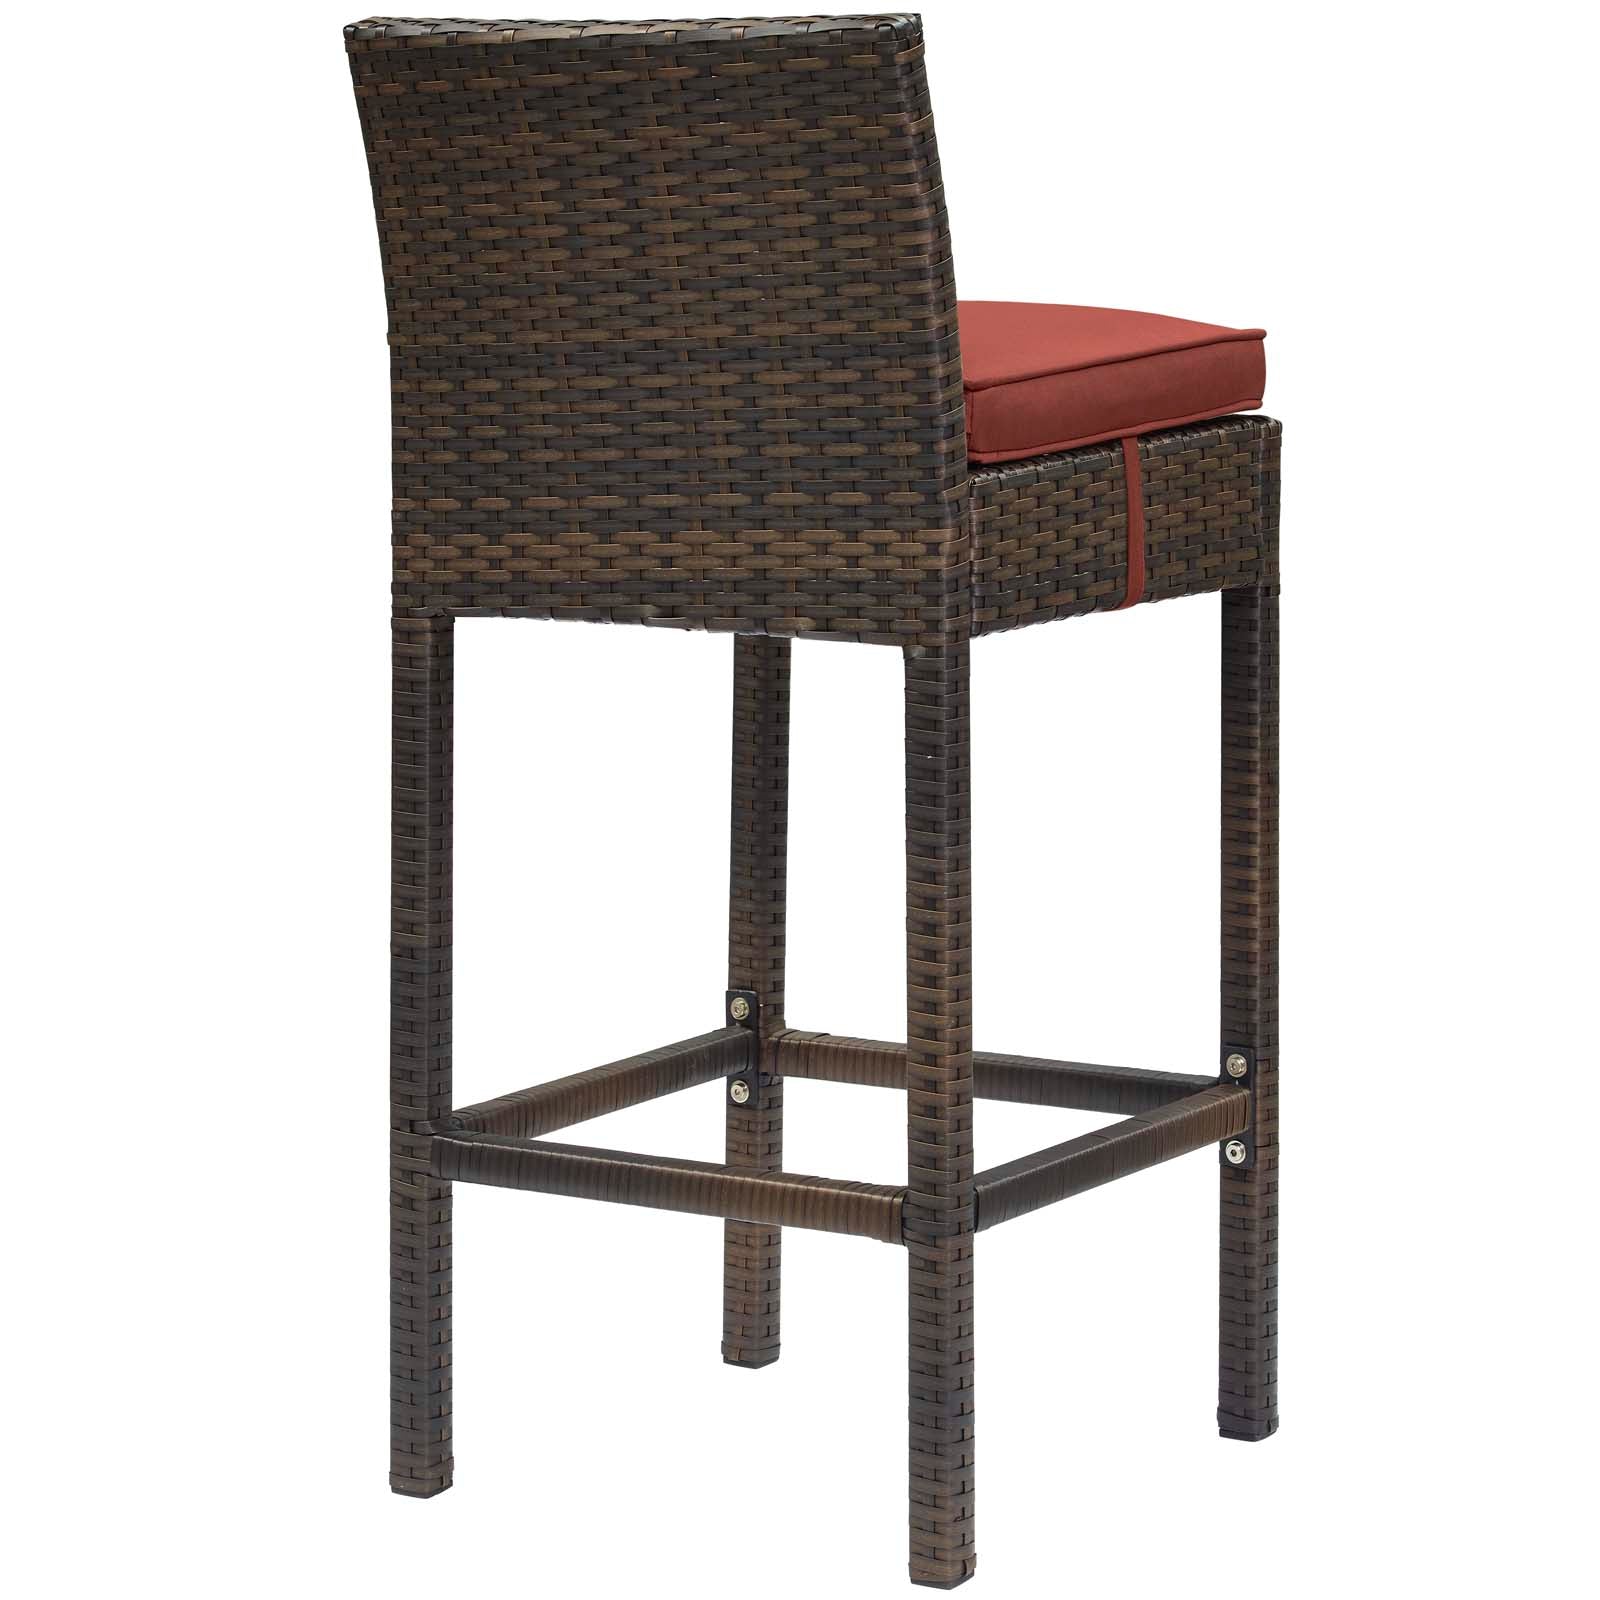 Modway Outdoor Barstools - Conduit Bar Stool Outdoor Patio Wicker Rattan Set of 2 Brown Currant